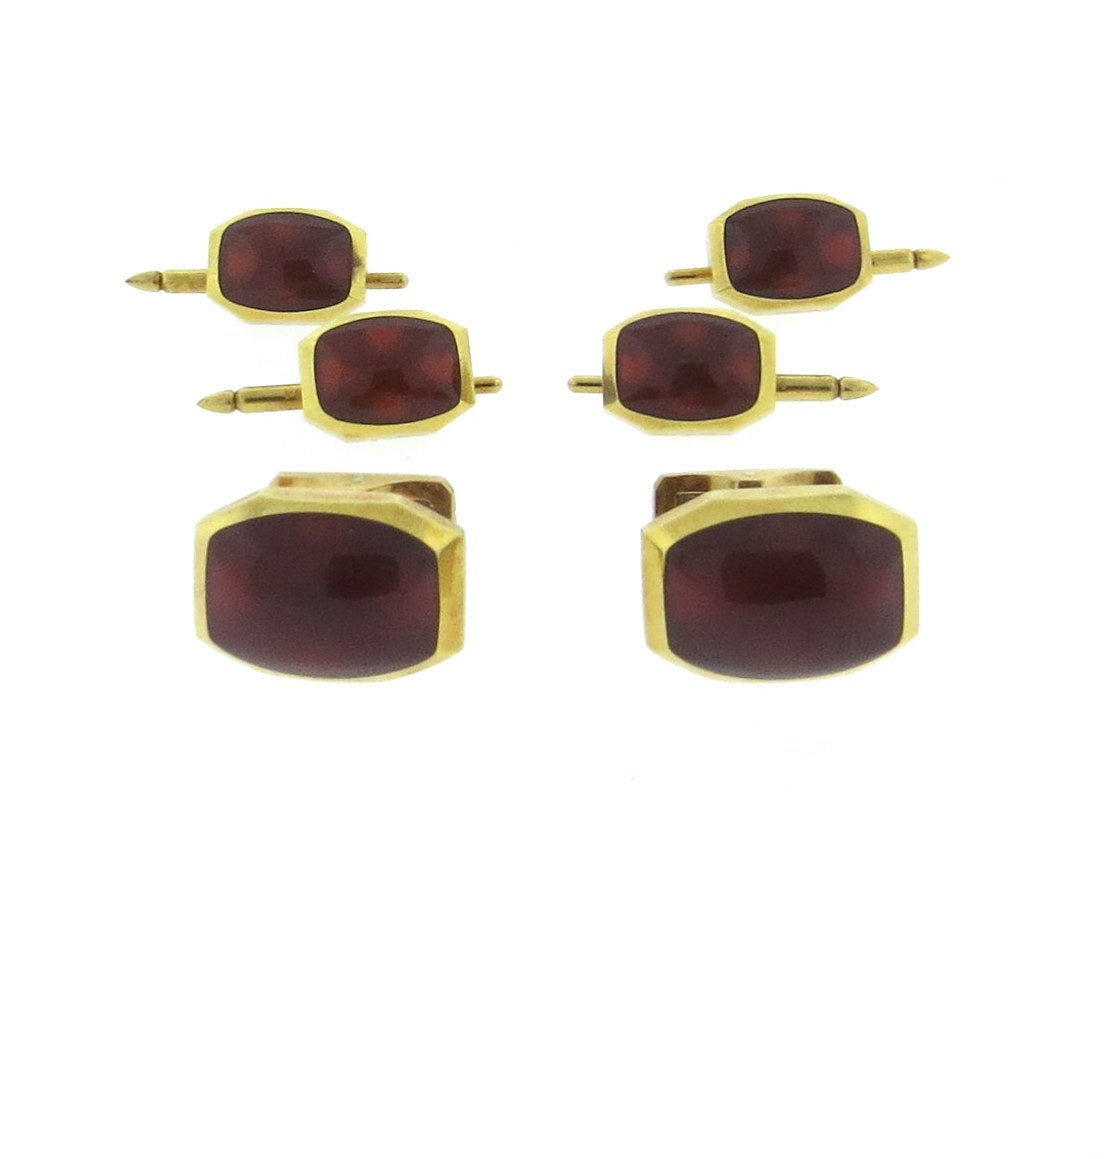 18k gold tuxedo set by Kurt Wayne, featuring cufflinks and studs. Cufflink top measures 20mm x 14mm, stud top measures 14mm x 10mm. Set with carnelian stones. Marked KW and 750. weight - 45 grams